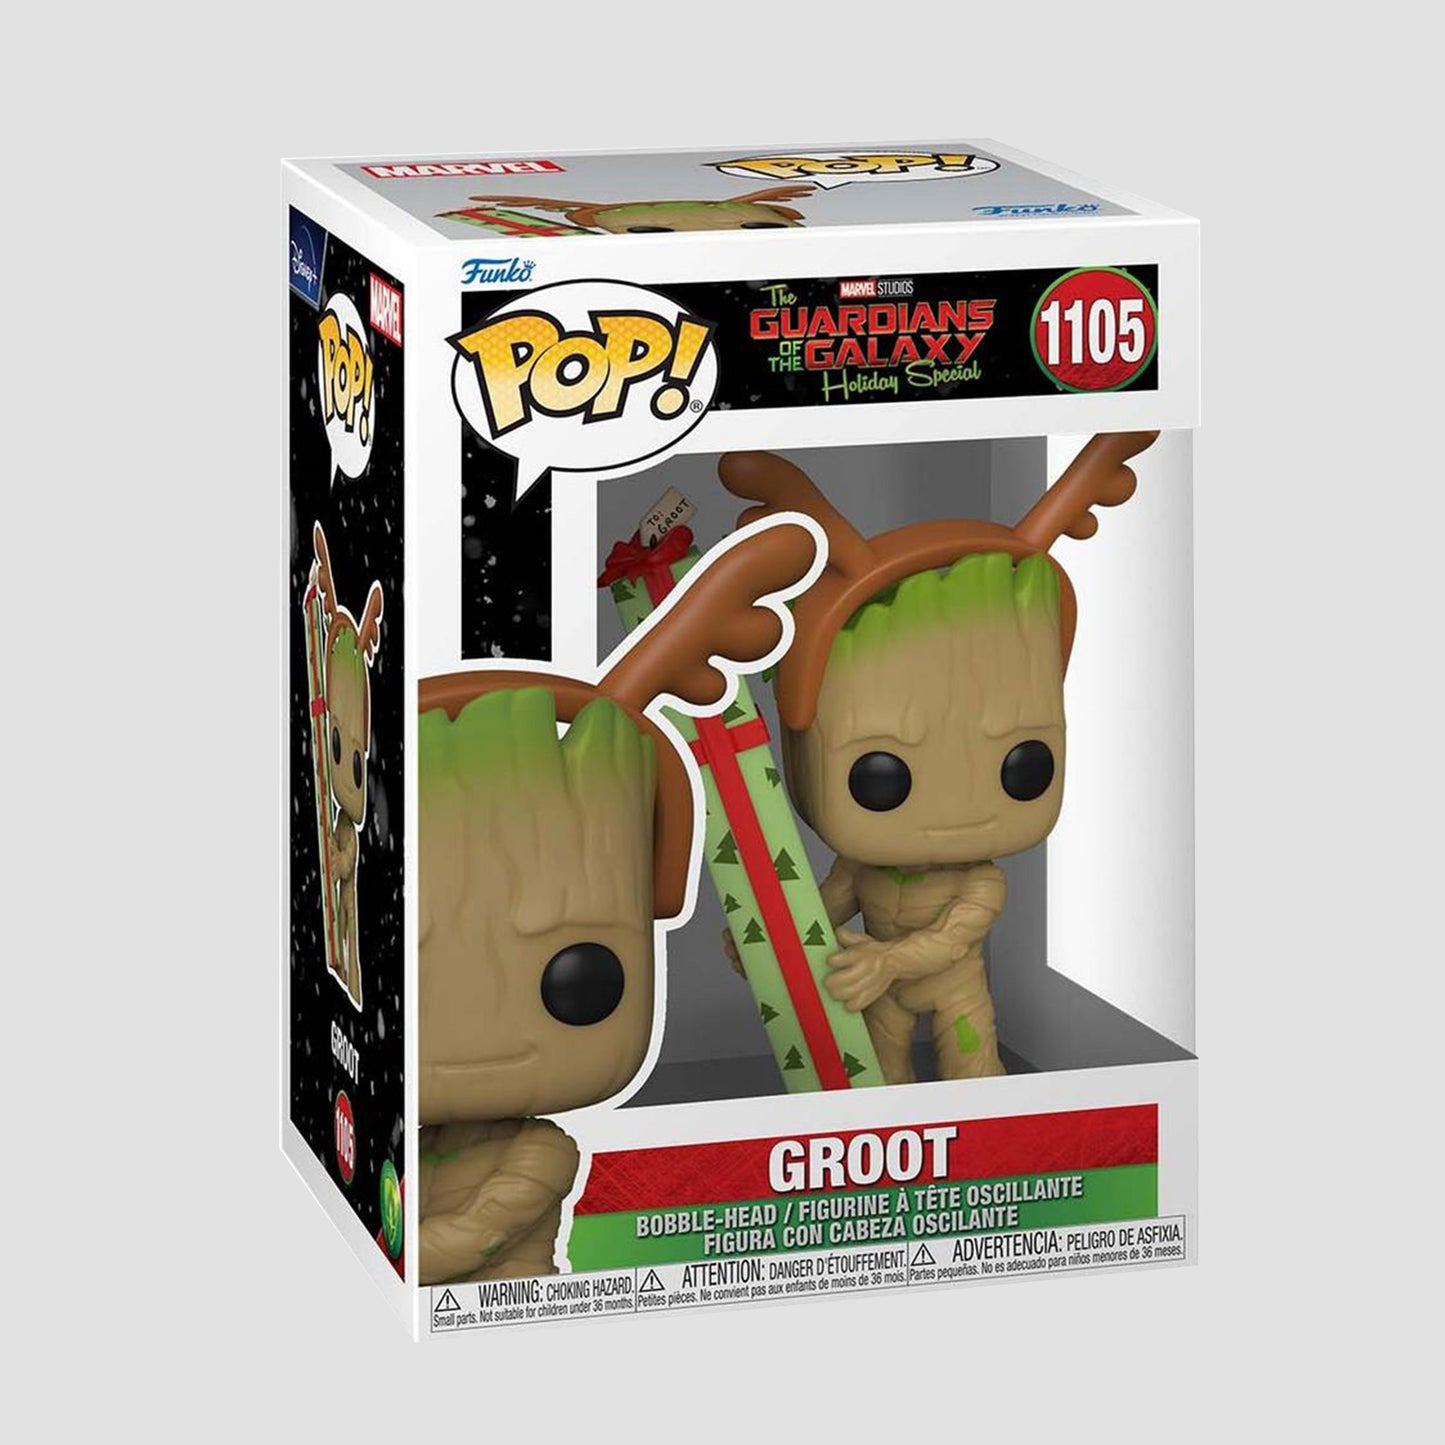 Groot Guardians of the Galaxy Holiday Funko Pop!